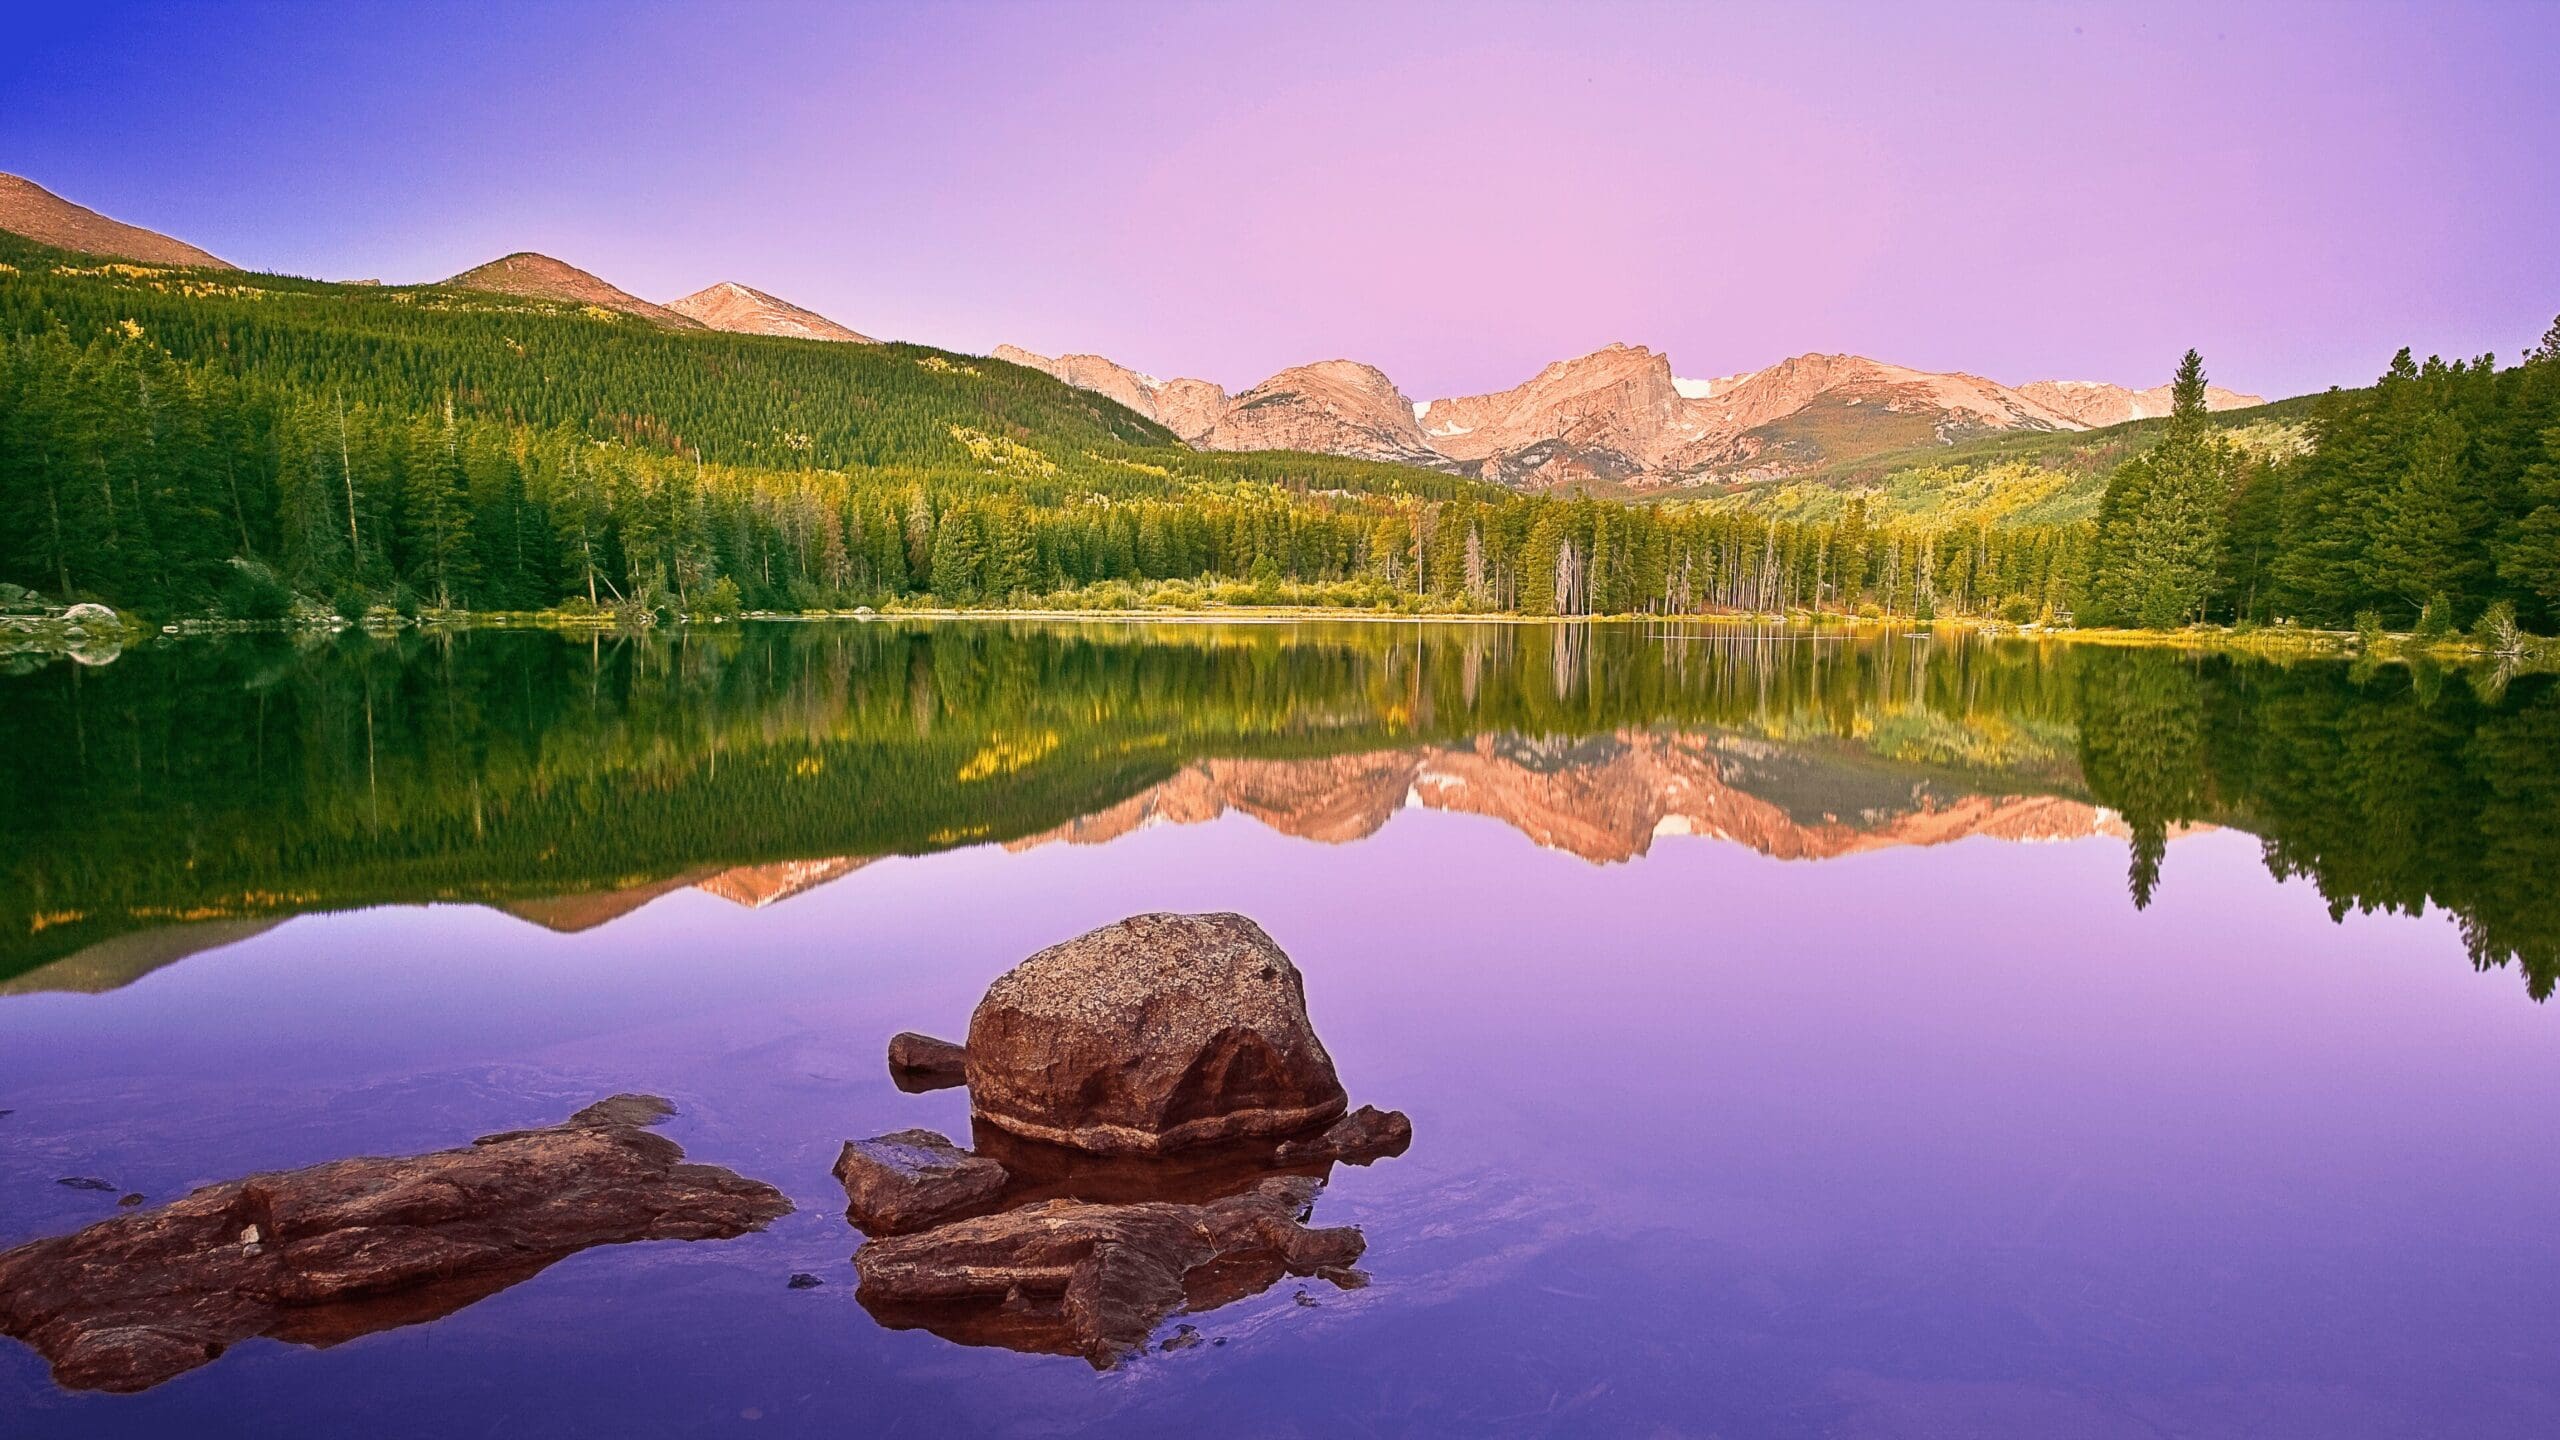 purple sky reflected in a lake a the park with mountains in the background